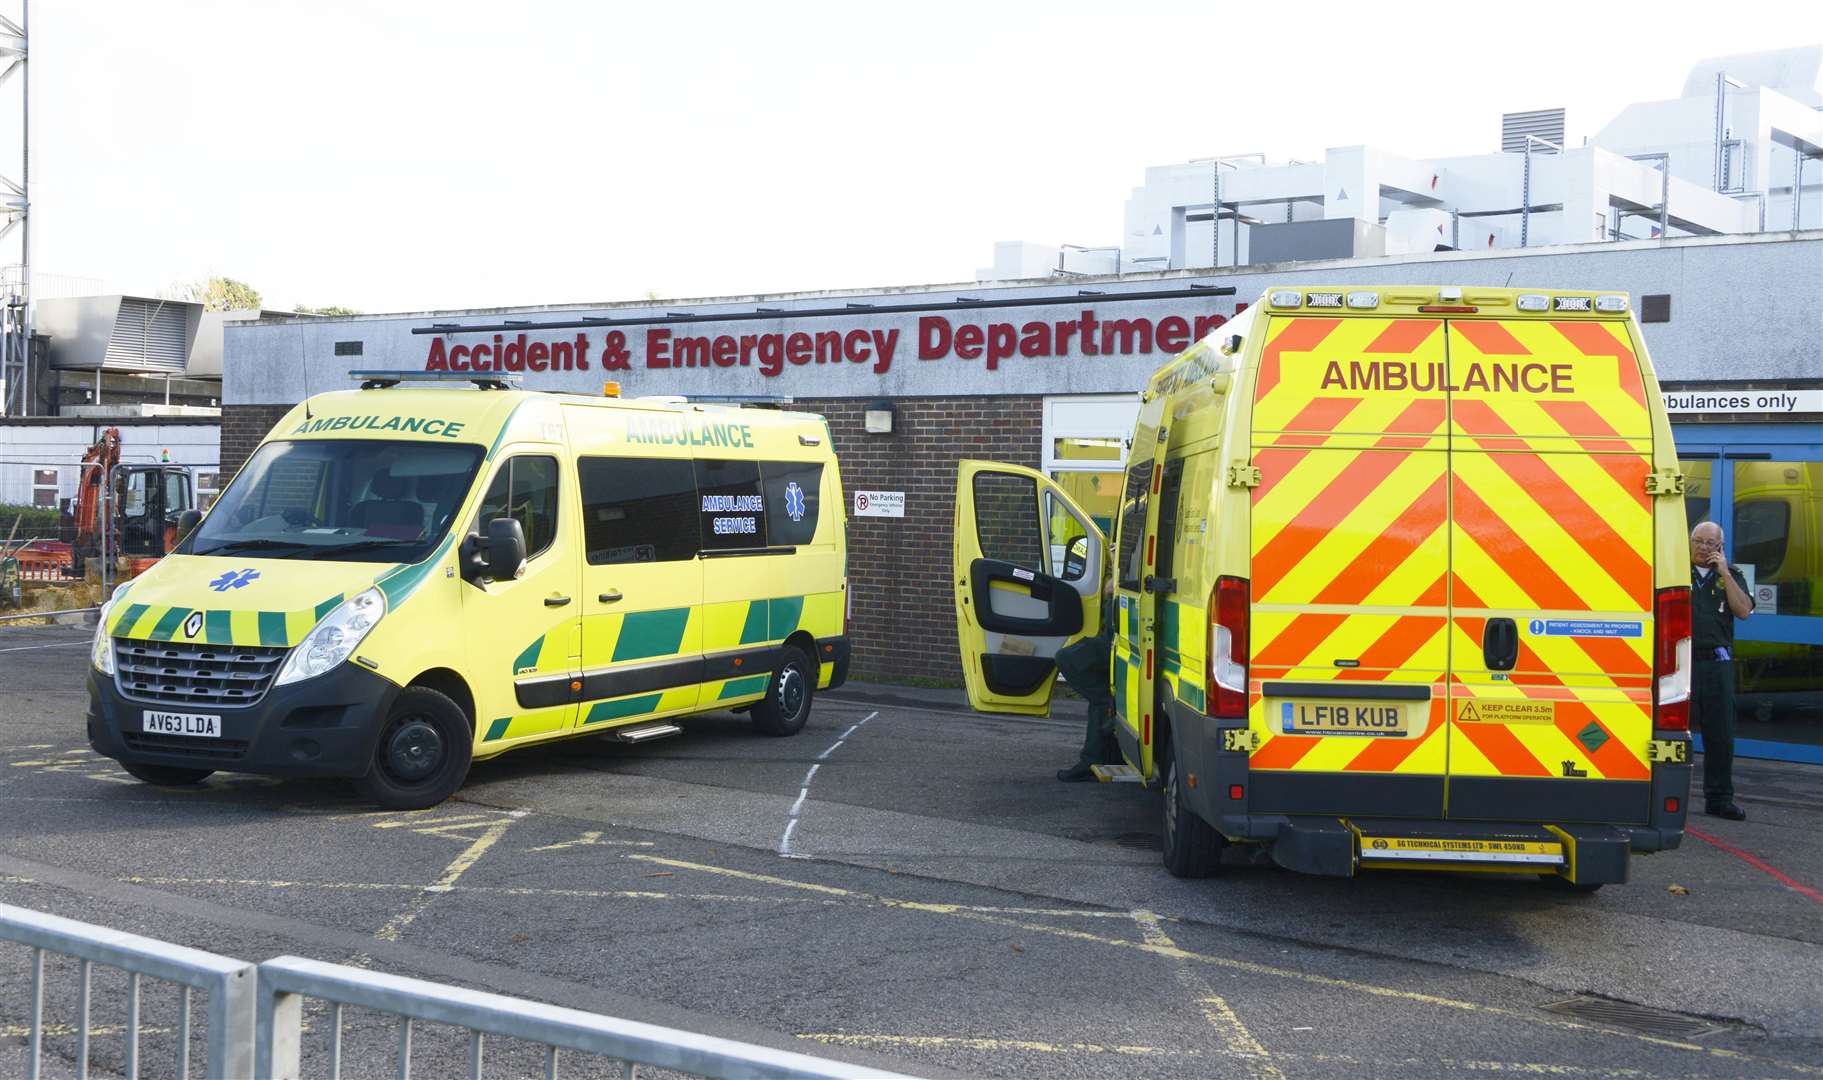 A&Es in both Ashford and Margate would shut if option two is selected